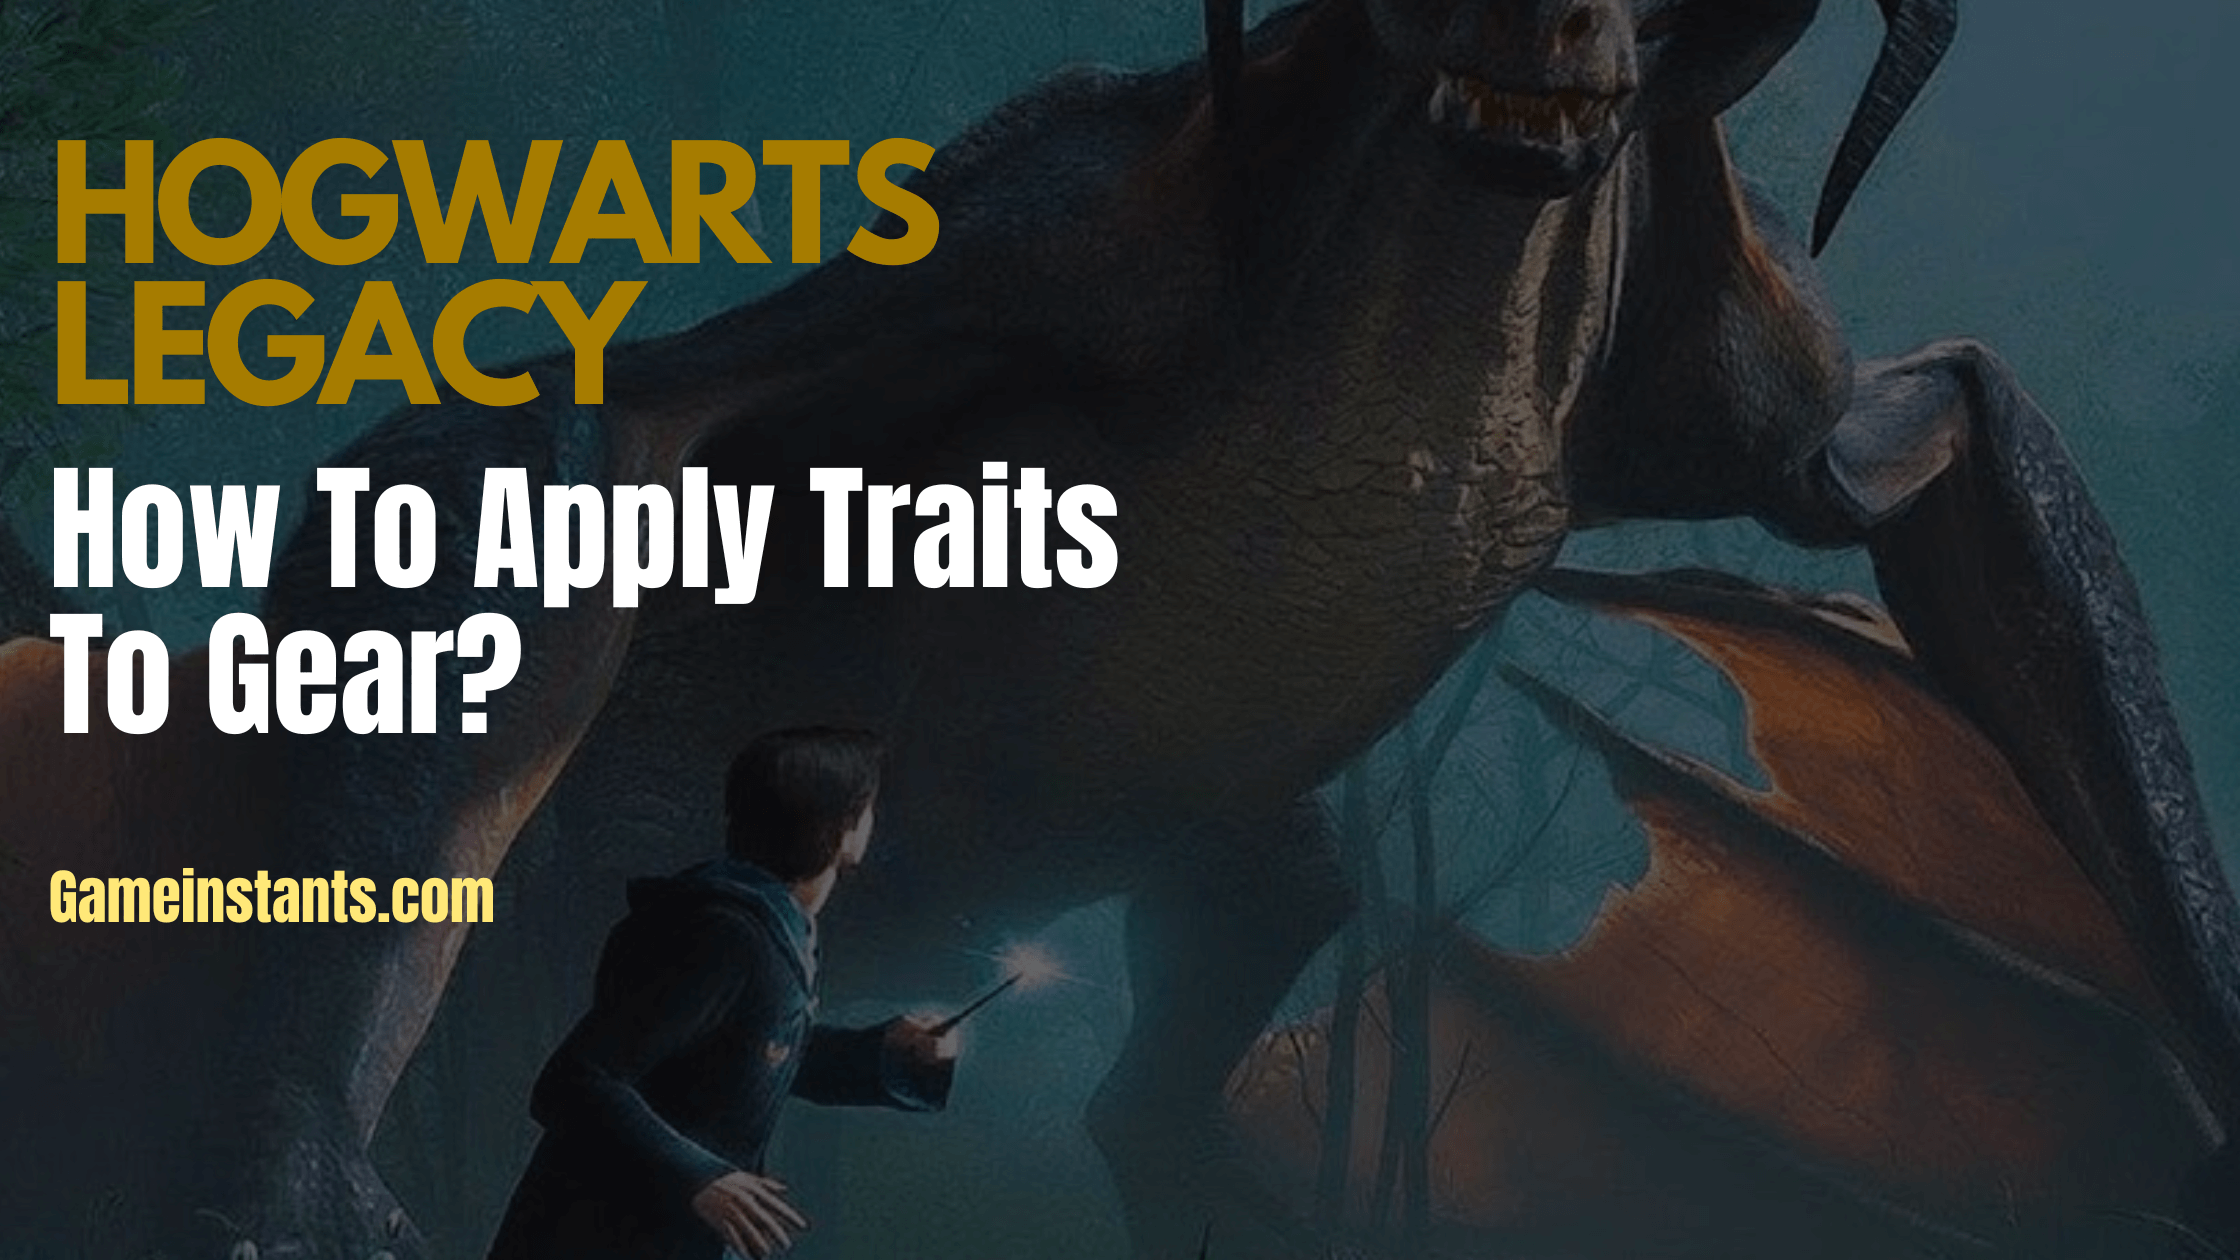 apply traits to gear in hogwarts legacy